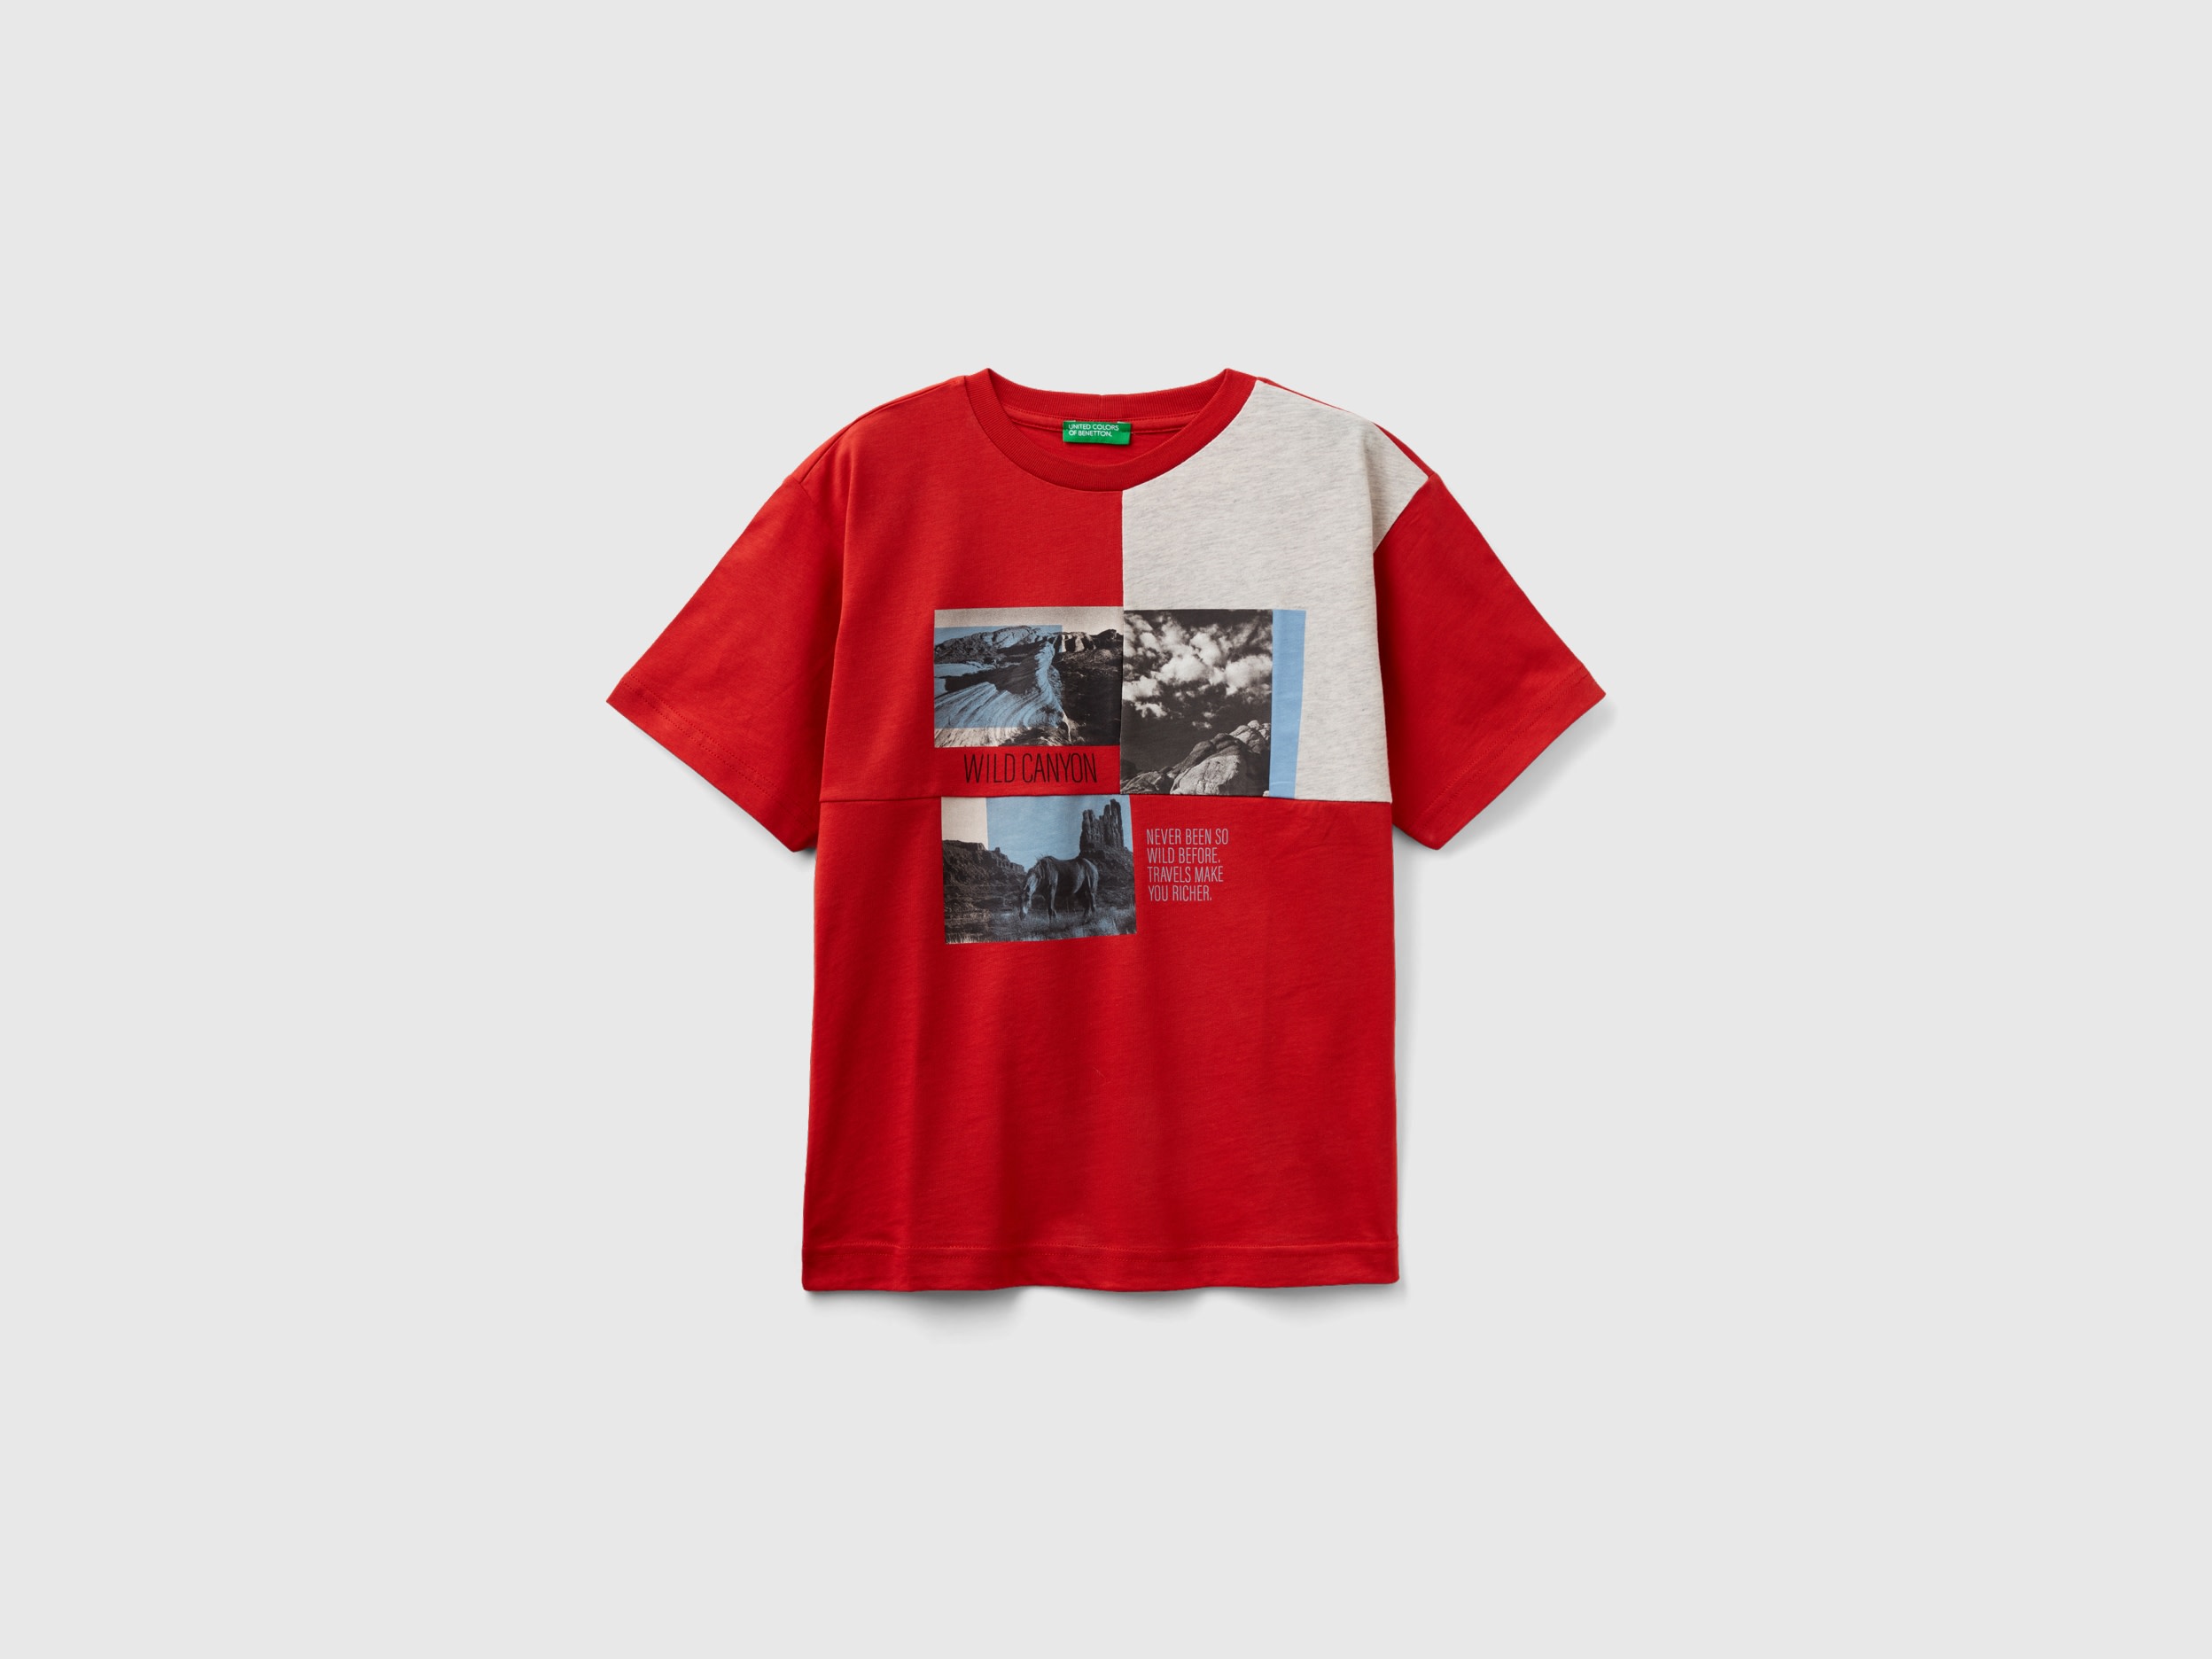 Image of Benetton, T-shirt With Photo Print, size 2XL, Red, Kids